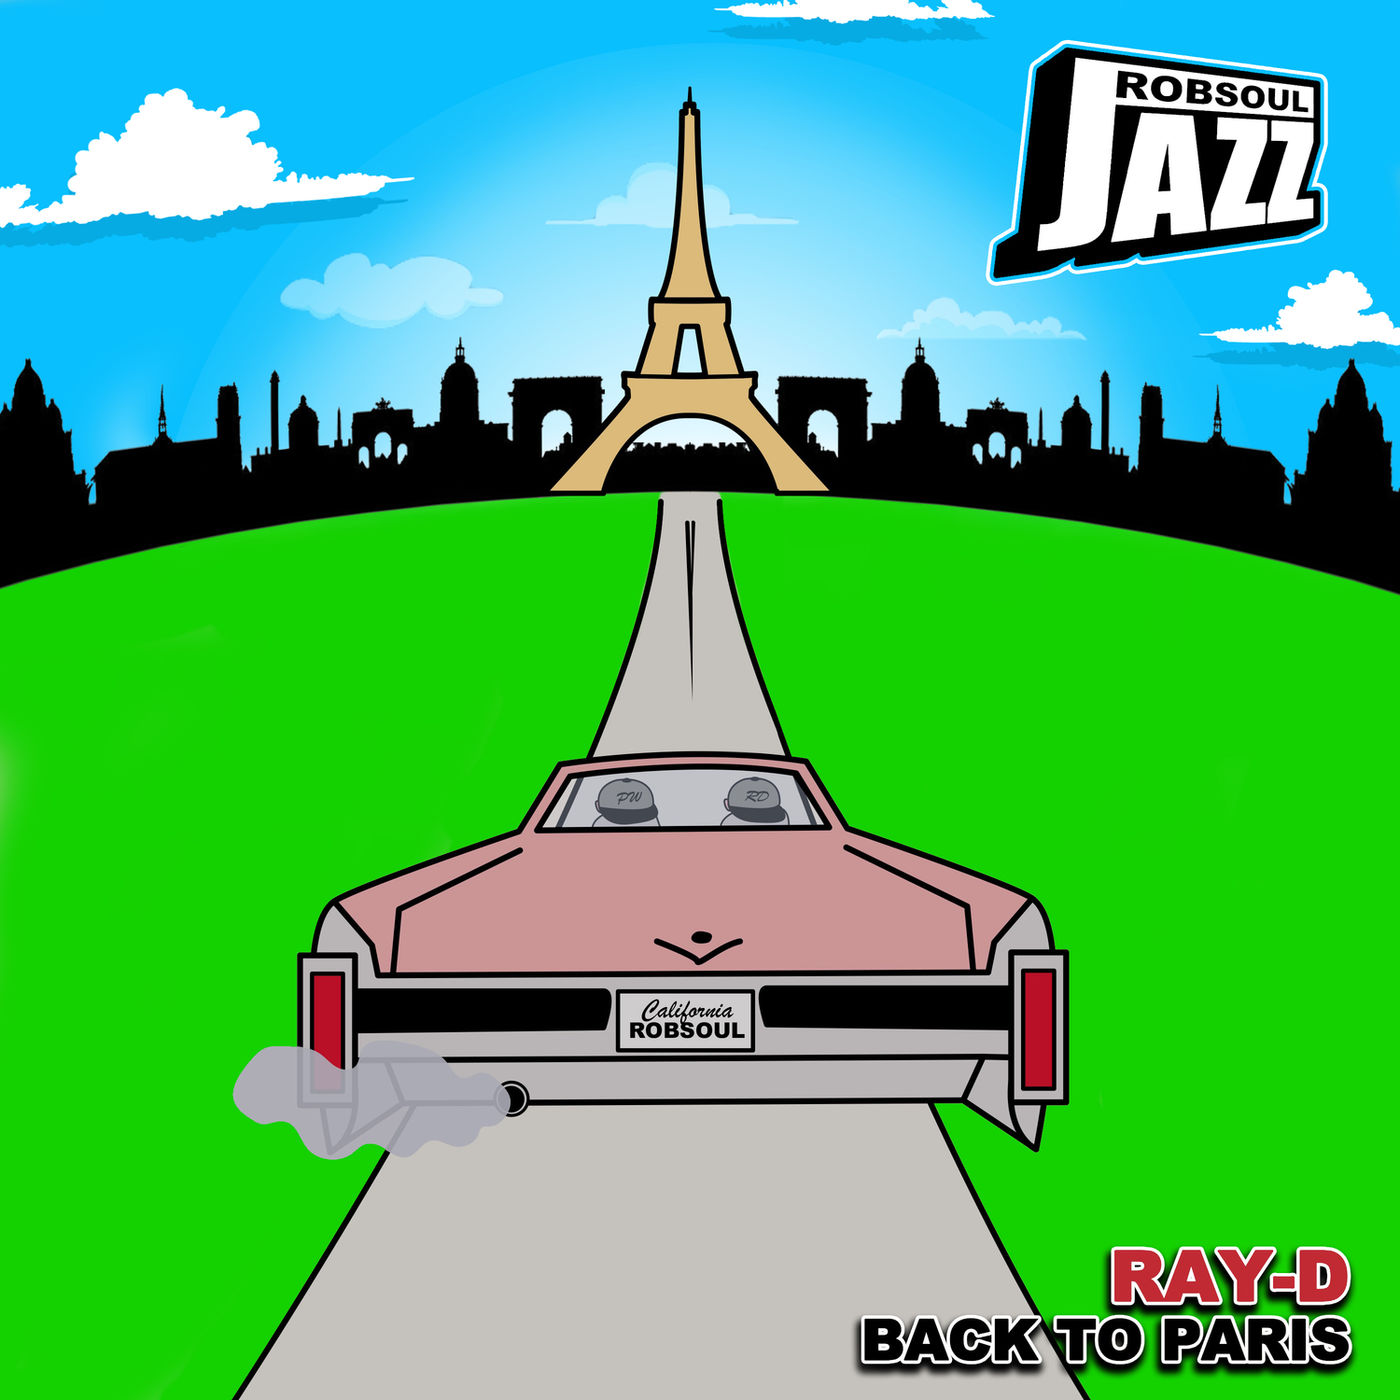 Ray-D - Back to Paris / Robsoul Jazz